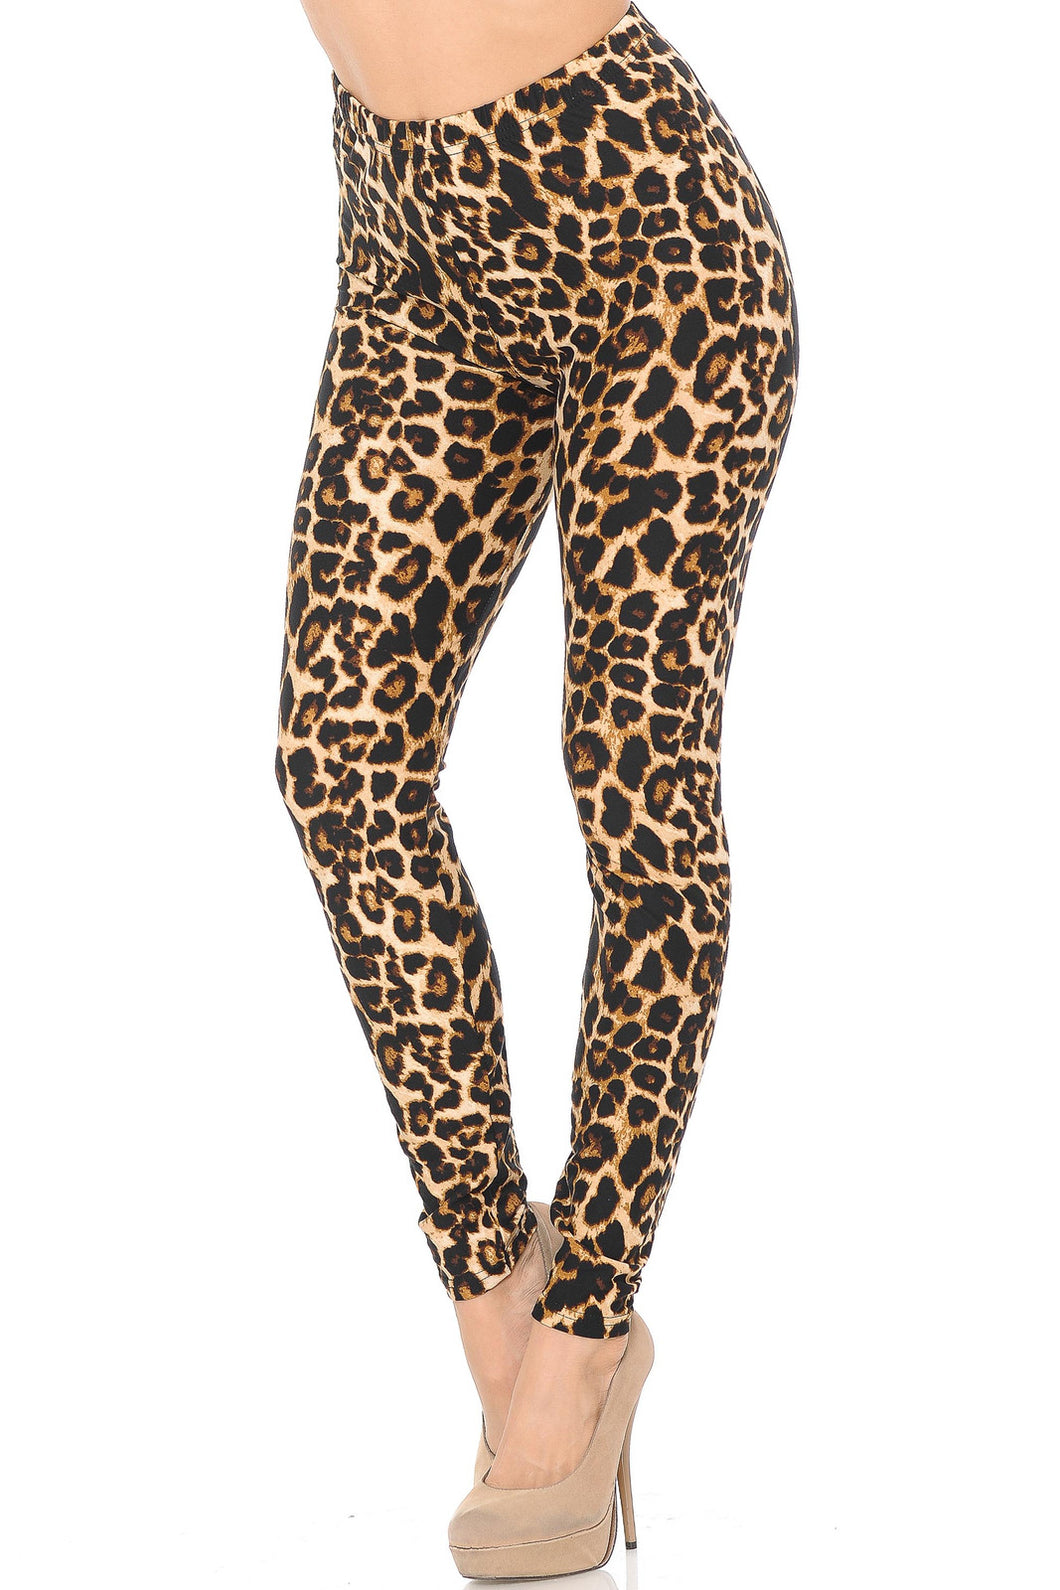 Lean Bold and Beautiful Leopard Full Length